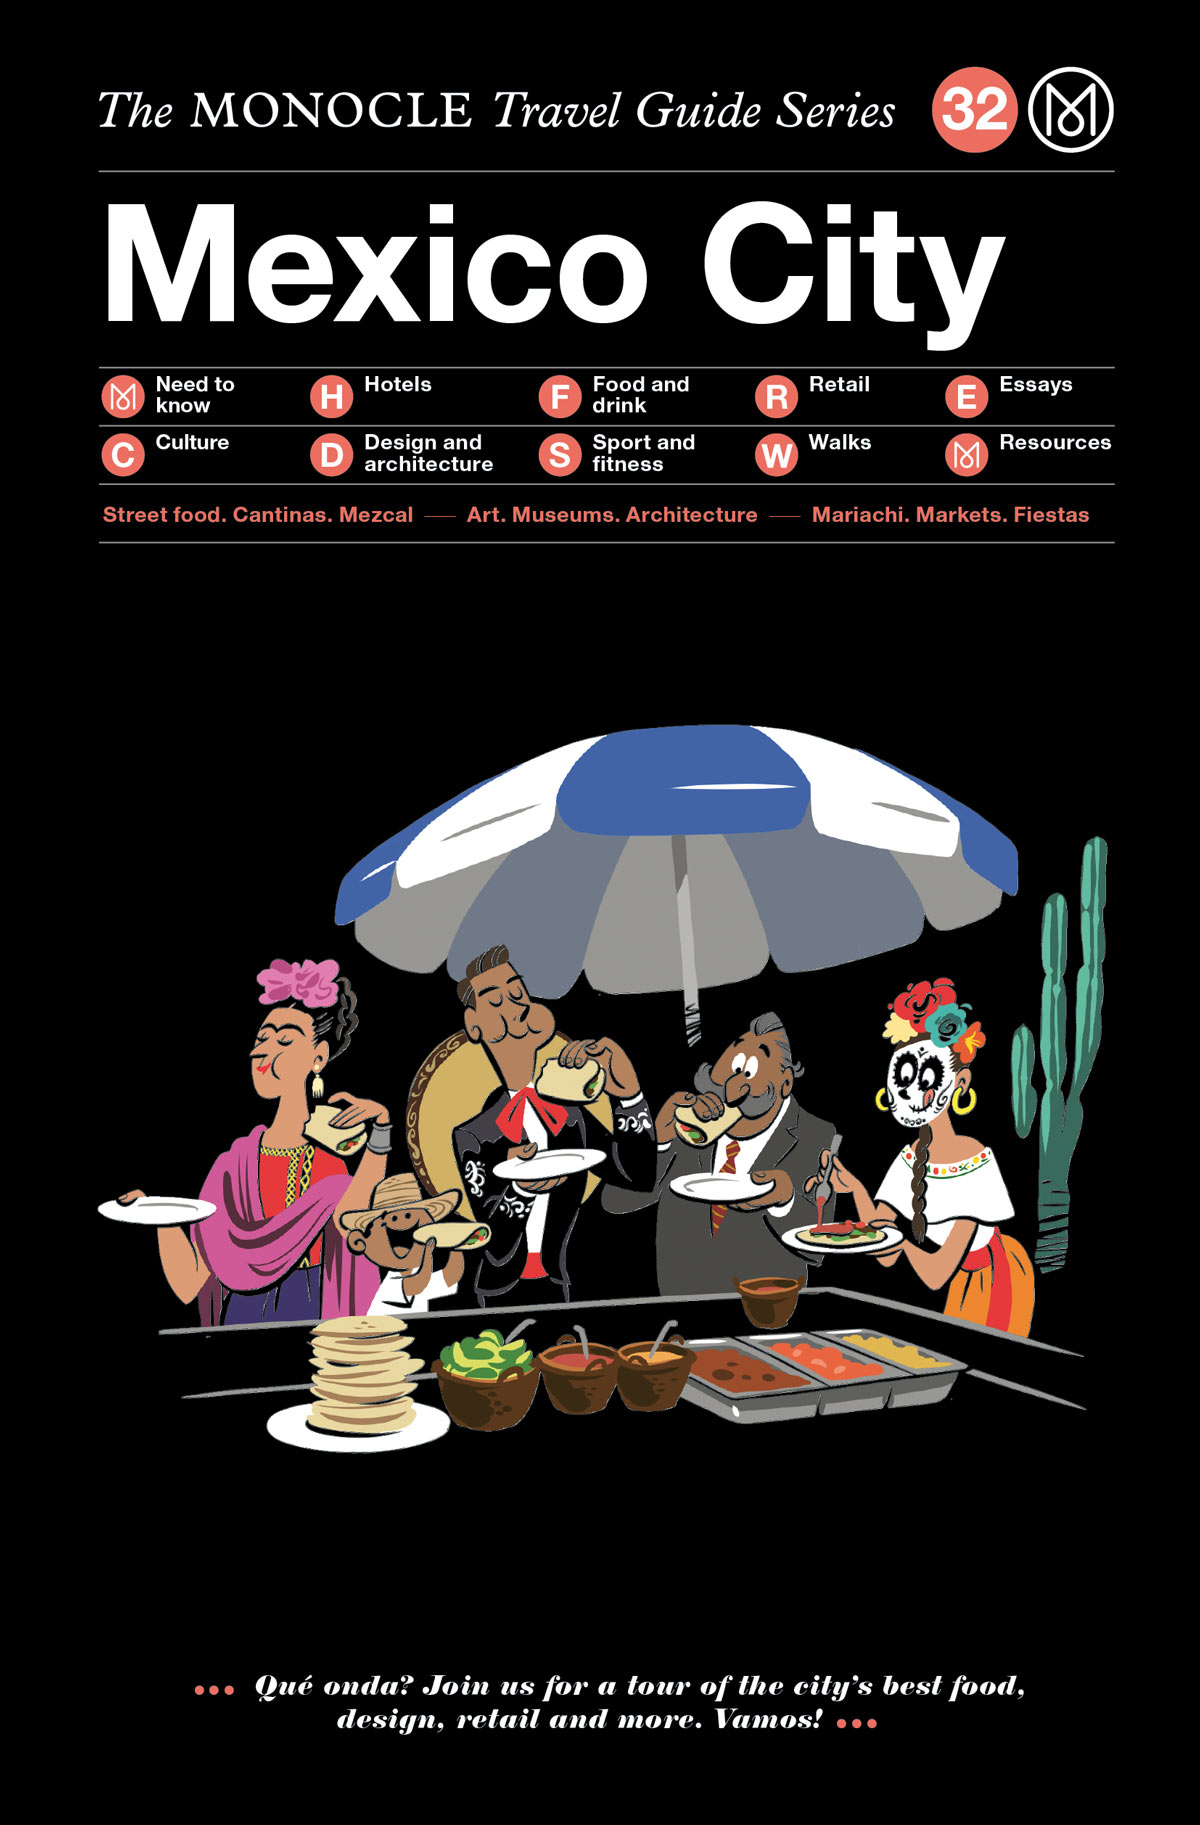 The Monocle Travel Guide Series – Mexico City